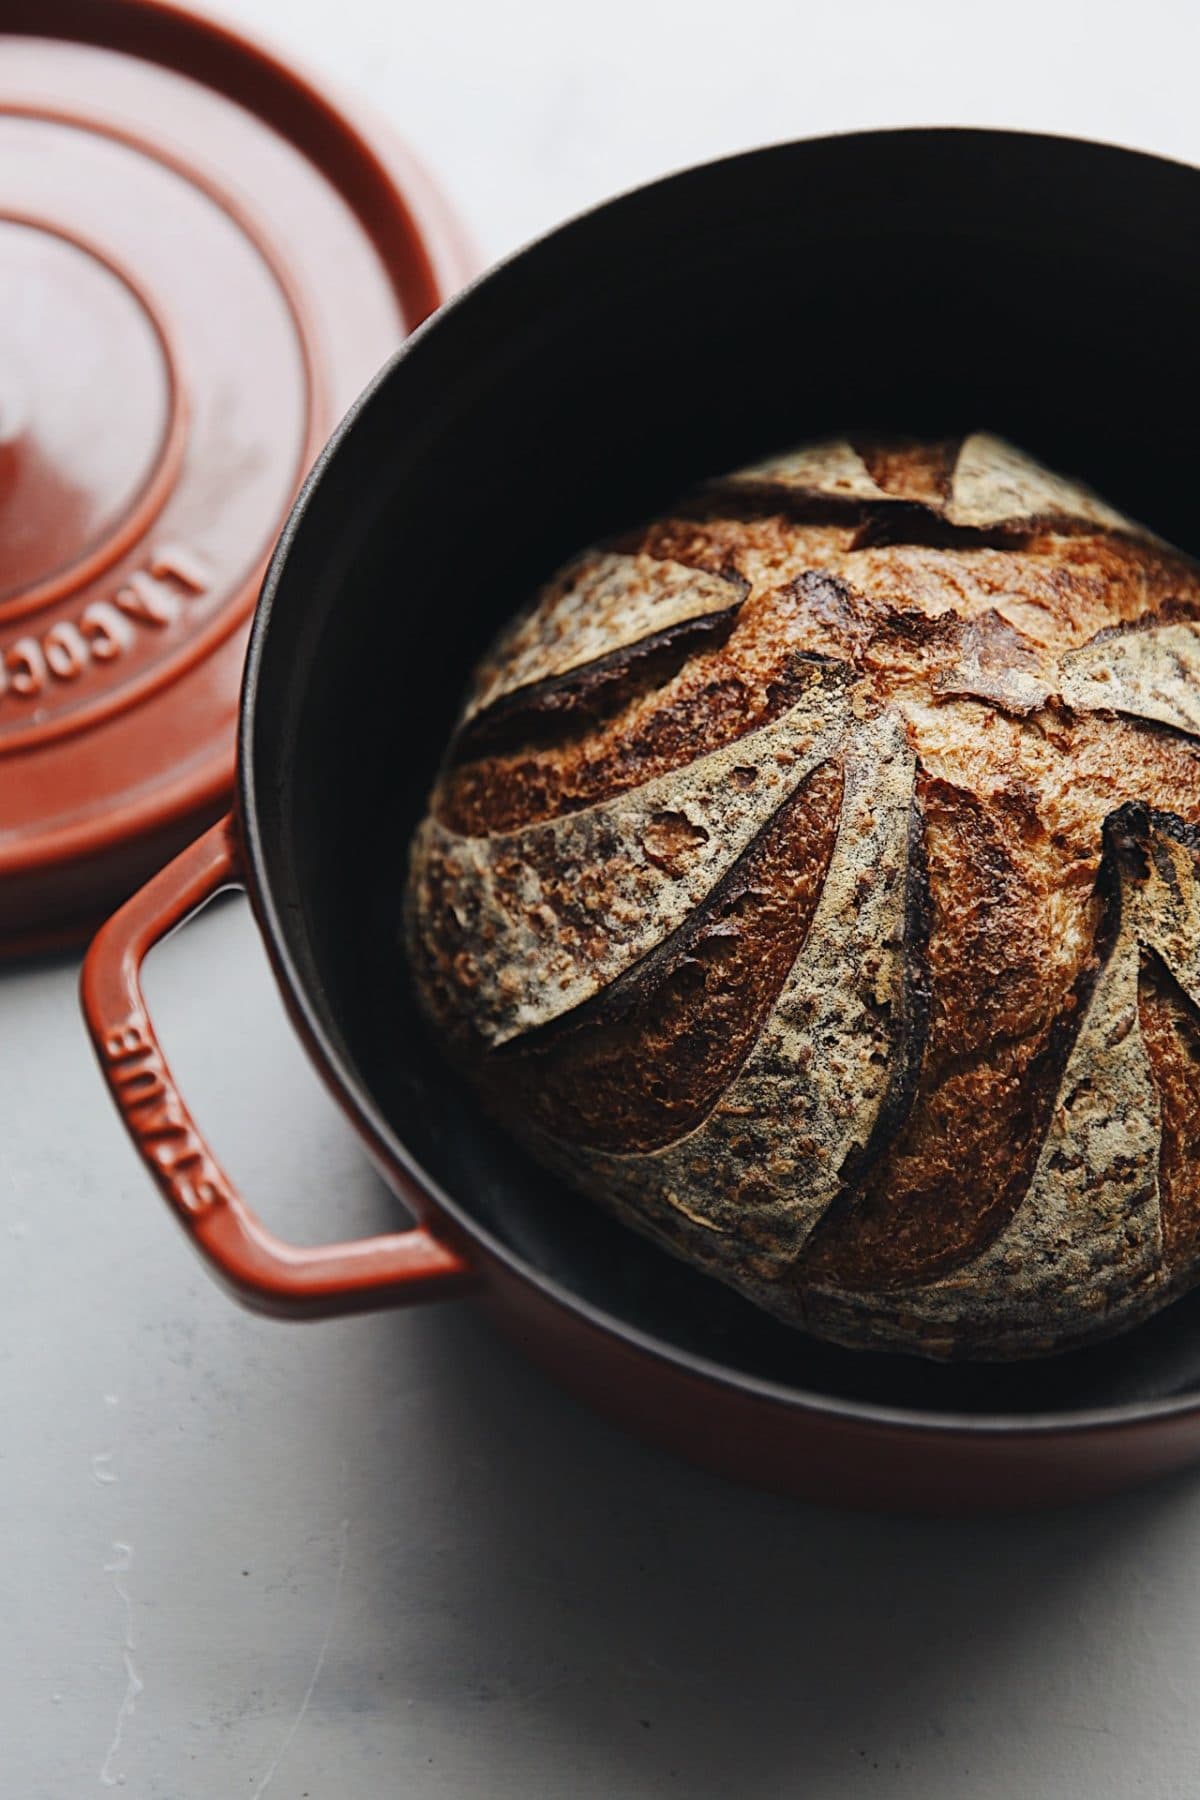 Tips for Making Bread in Cast Iron